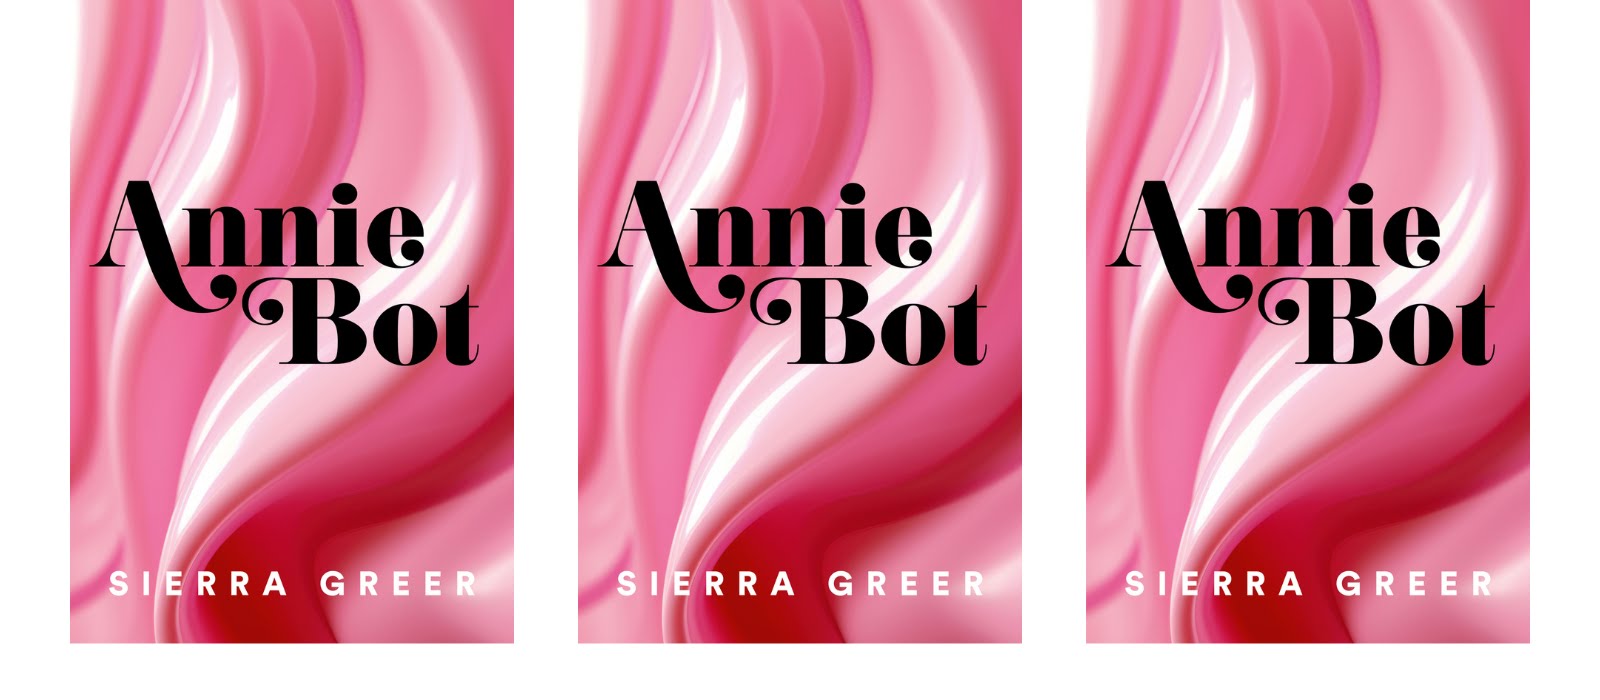 Read an extract from ‘Annie Bot’ by Sierra Greer